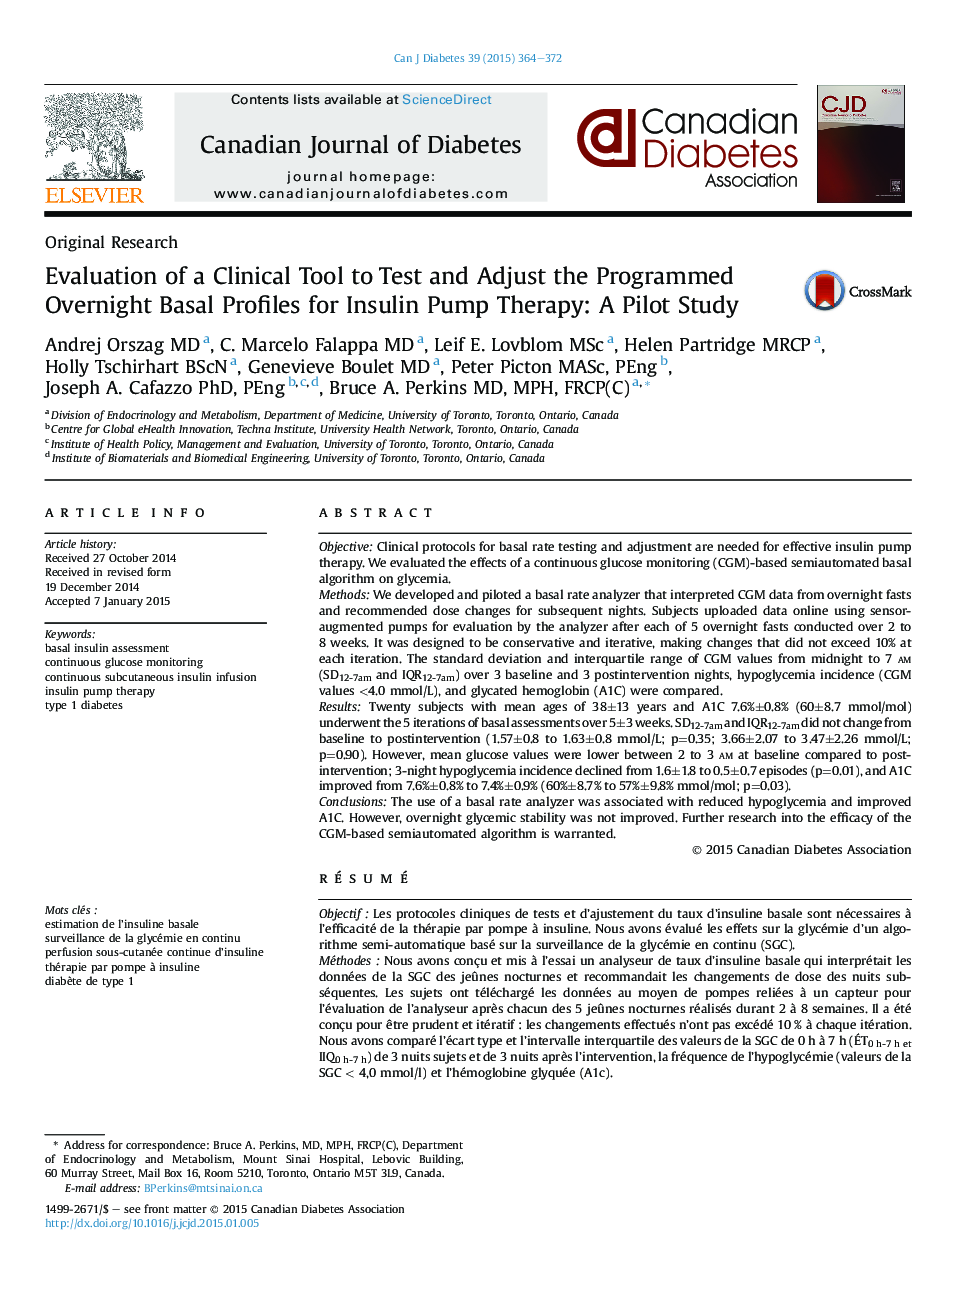 Evaluation of a Clinical Tool to Test and Adjust the Programmed Overnight Basal Profiles for Insulin Pump Therapy: A Pilot Study